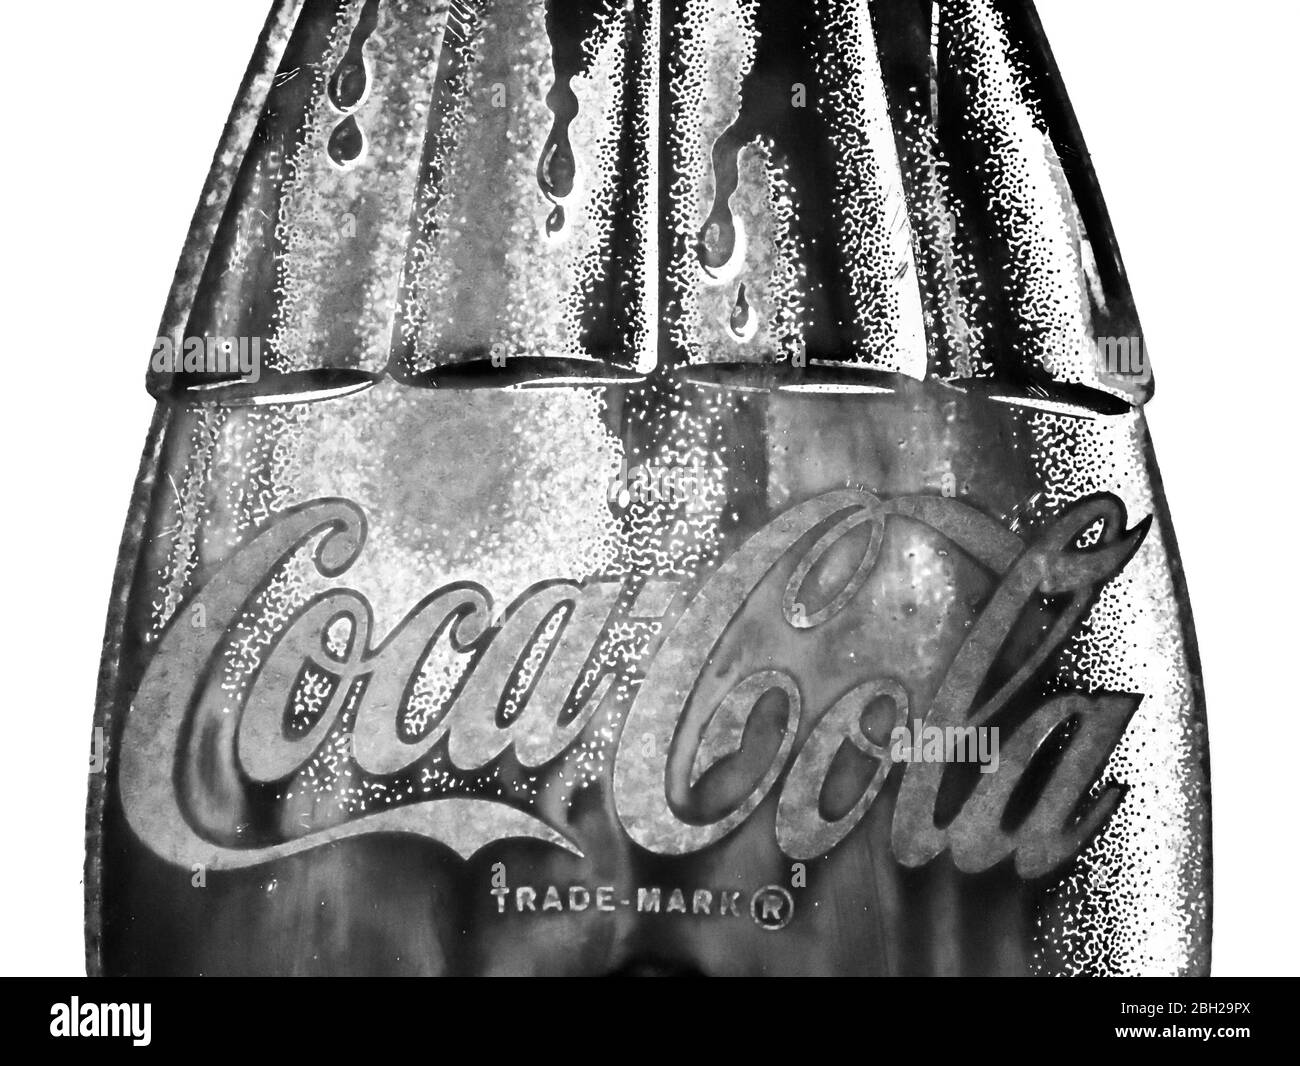 Rusted metal bottle-shaped Coco Cola sign black and white on white background Stock Photo